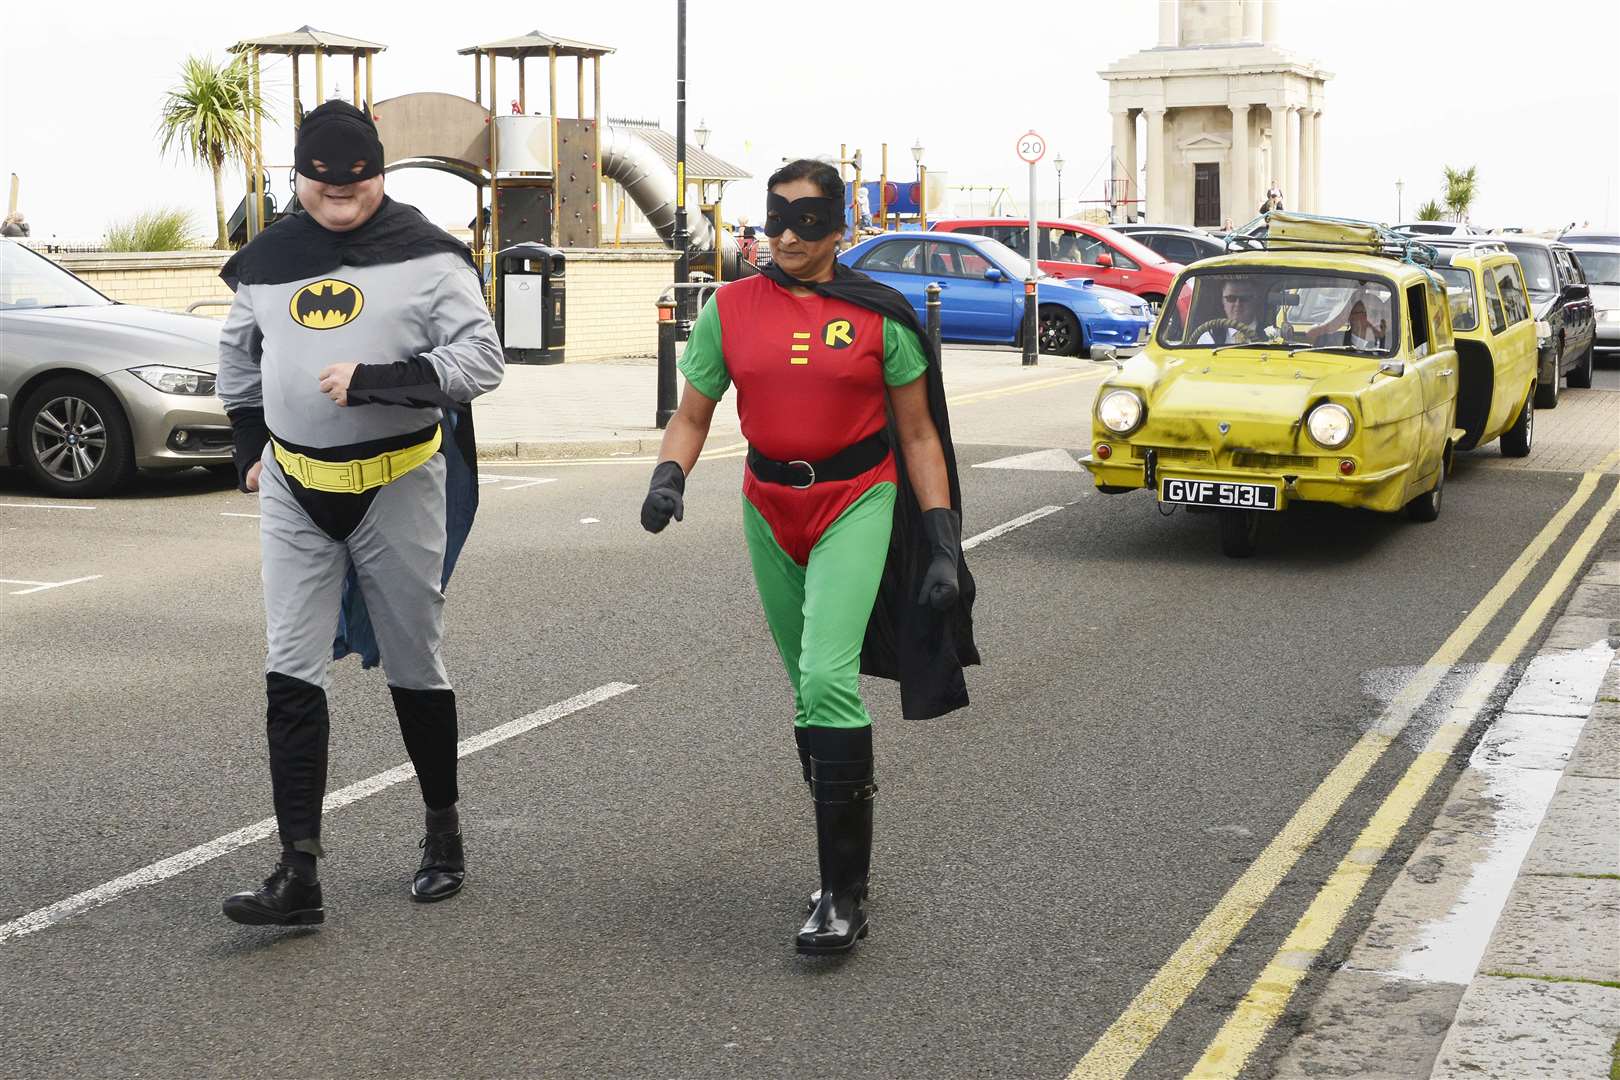 The funeral procession of Peter Wolstenholme goes past Herne Bay Central Parade with its Only Fools and Horses theme, with Batman and Robin running in front. Picture: Paul Amos